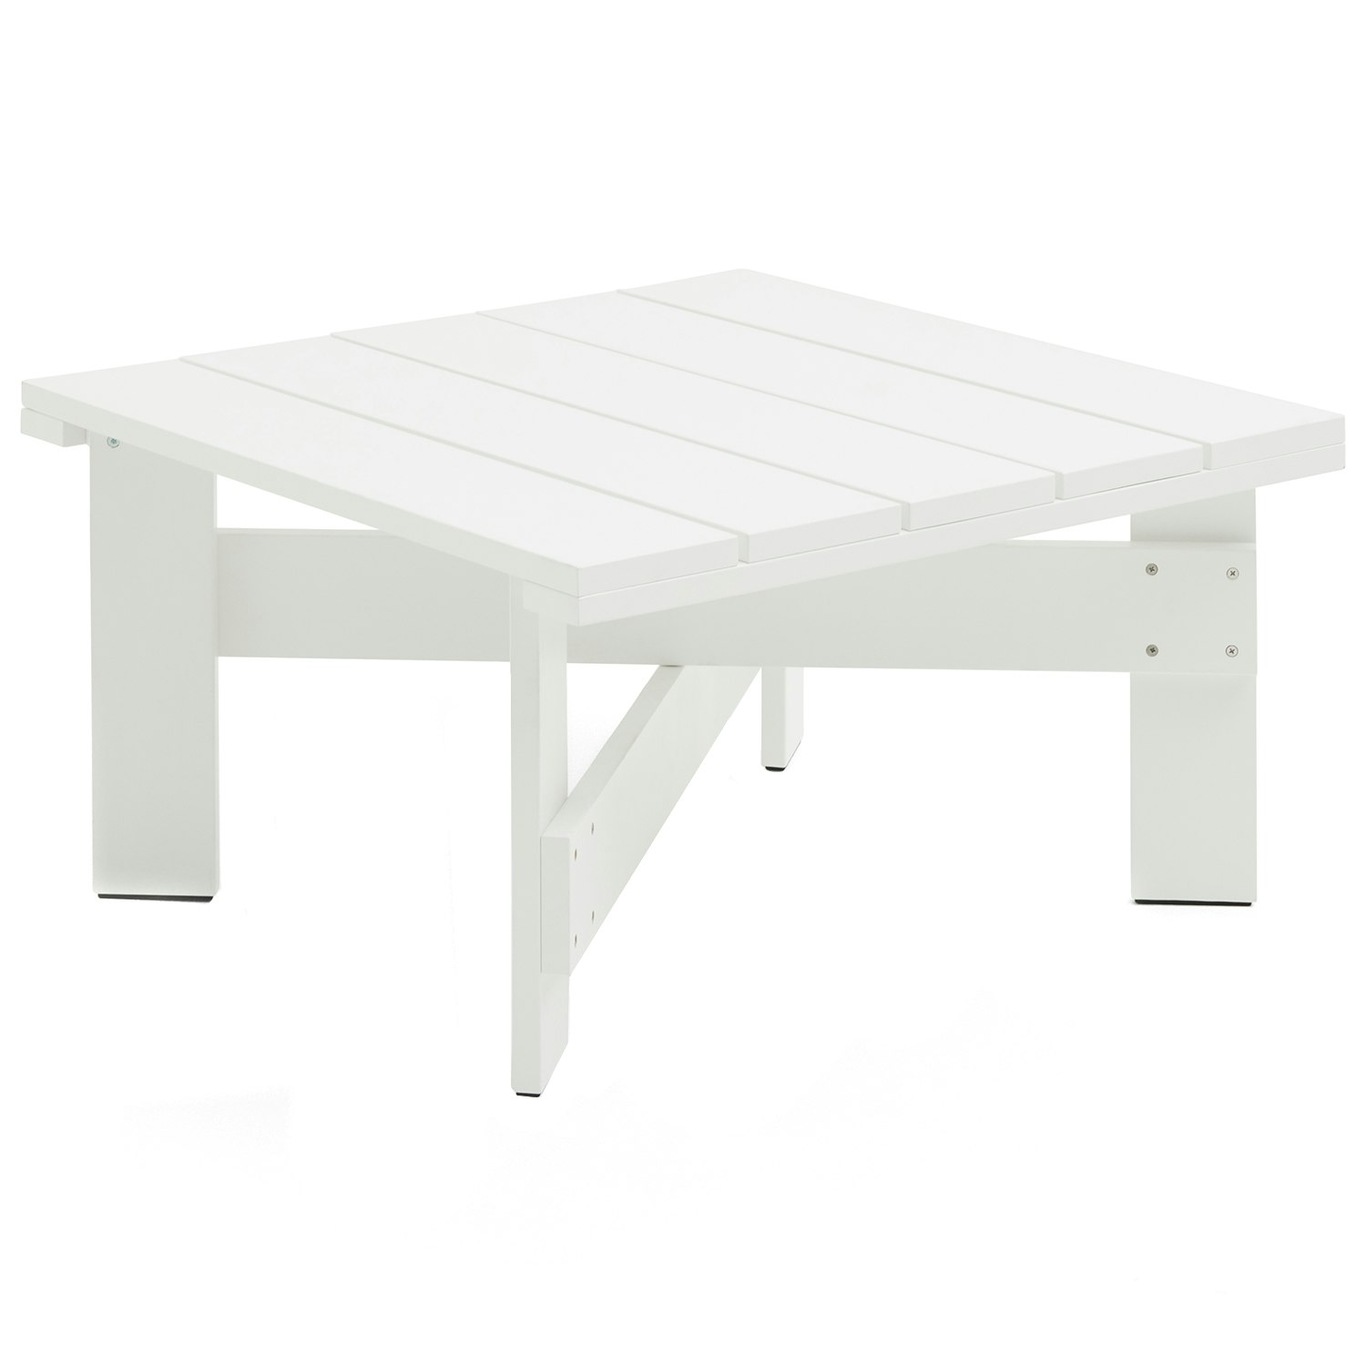 Crate Lounge Table 75x75 cm, White